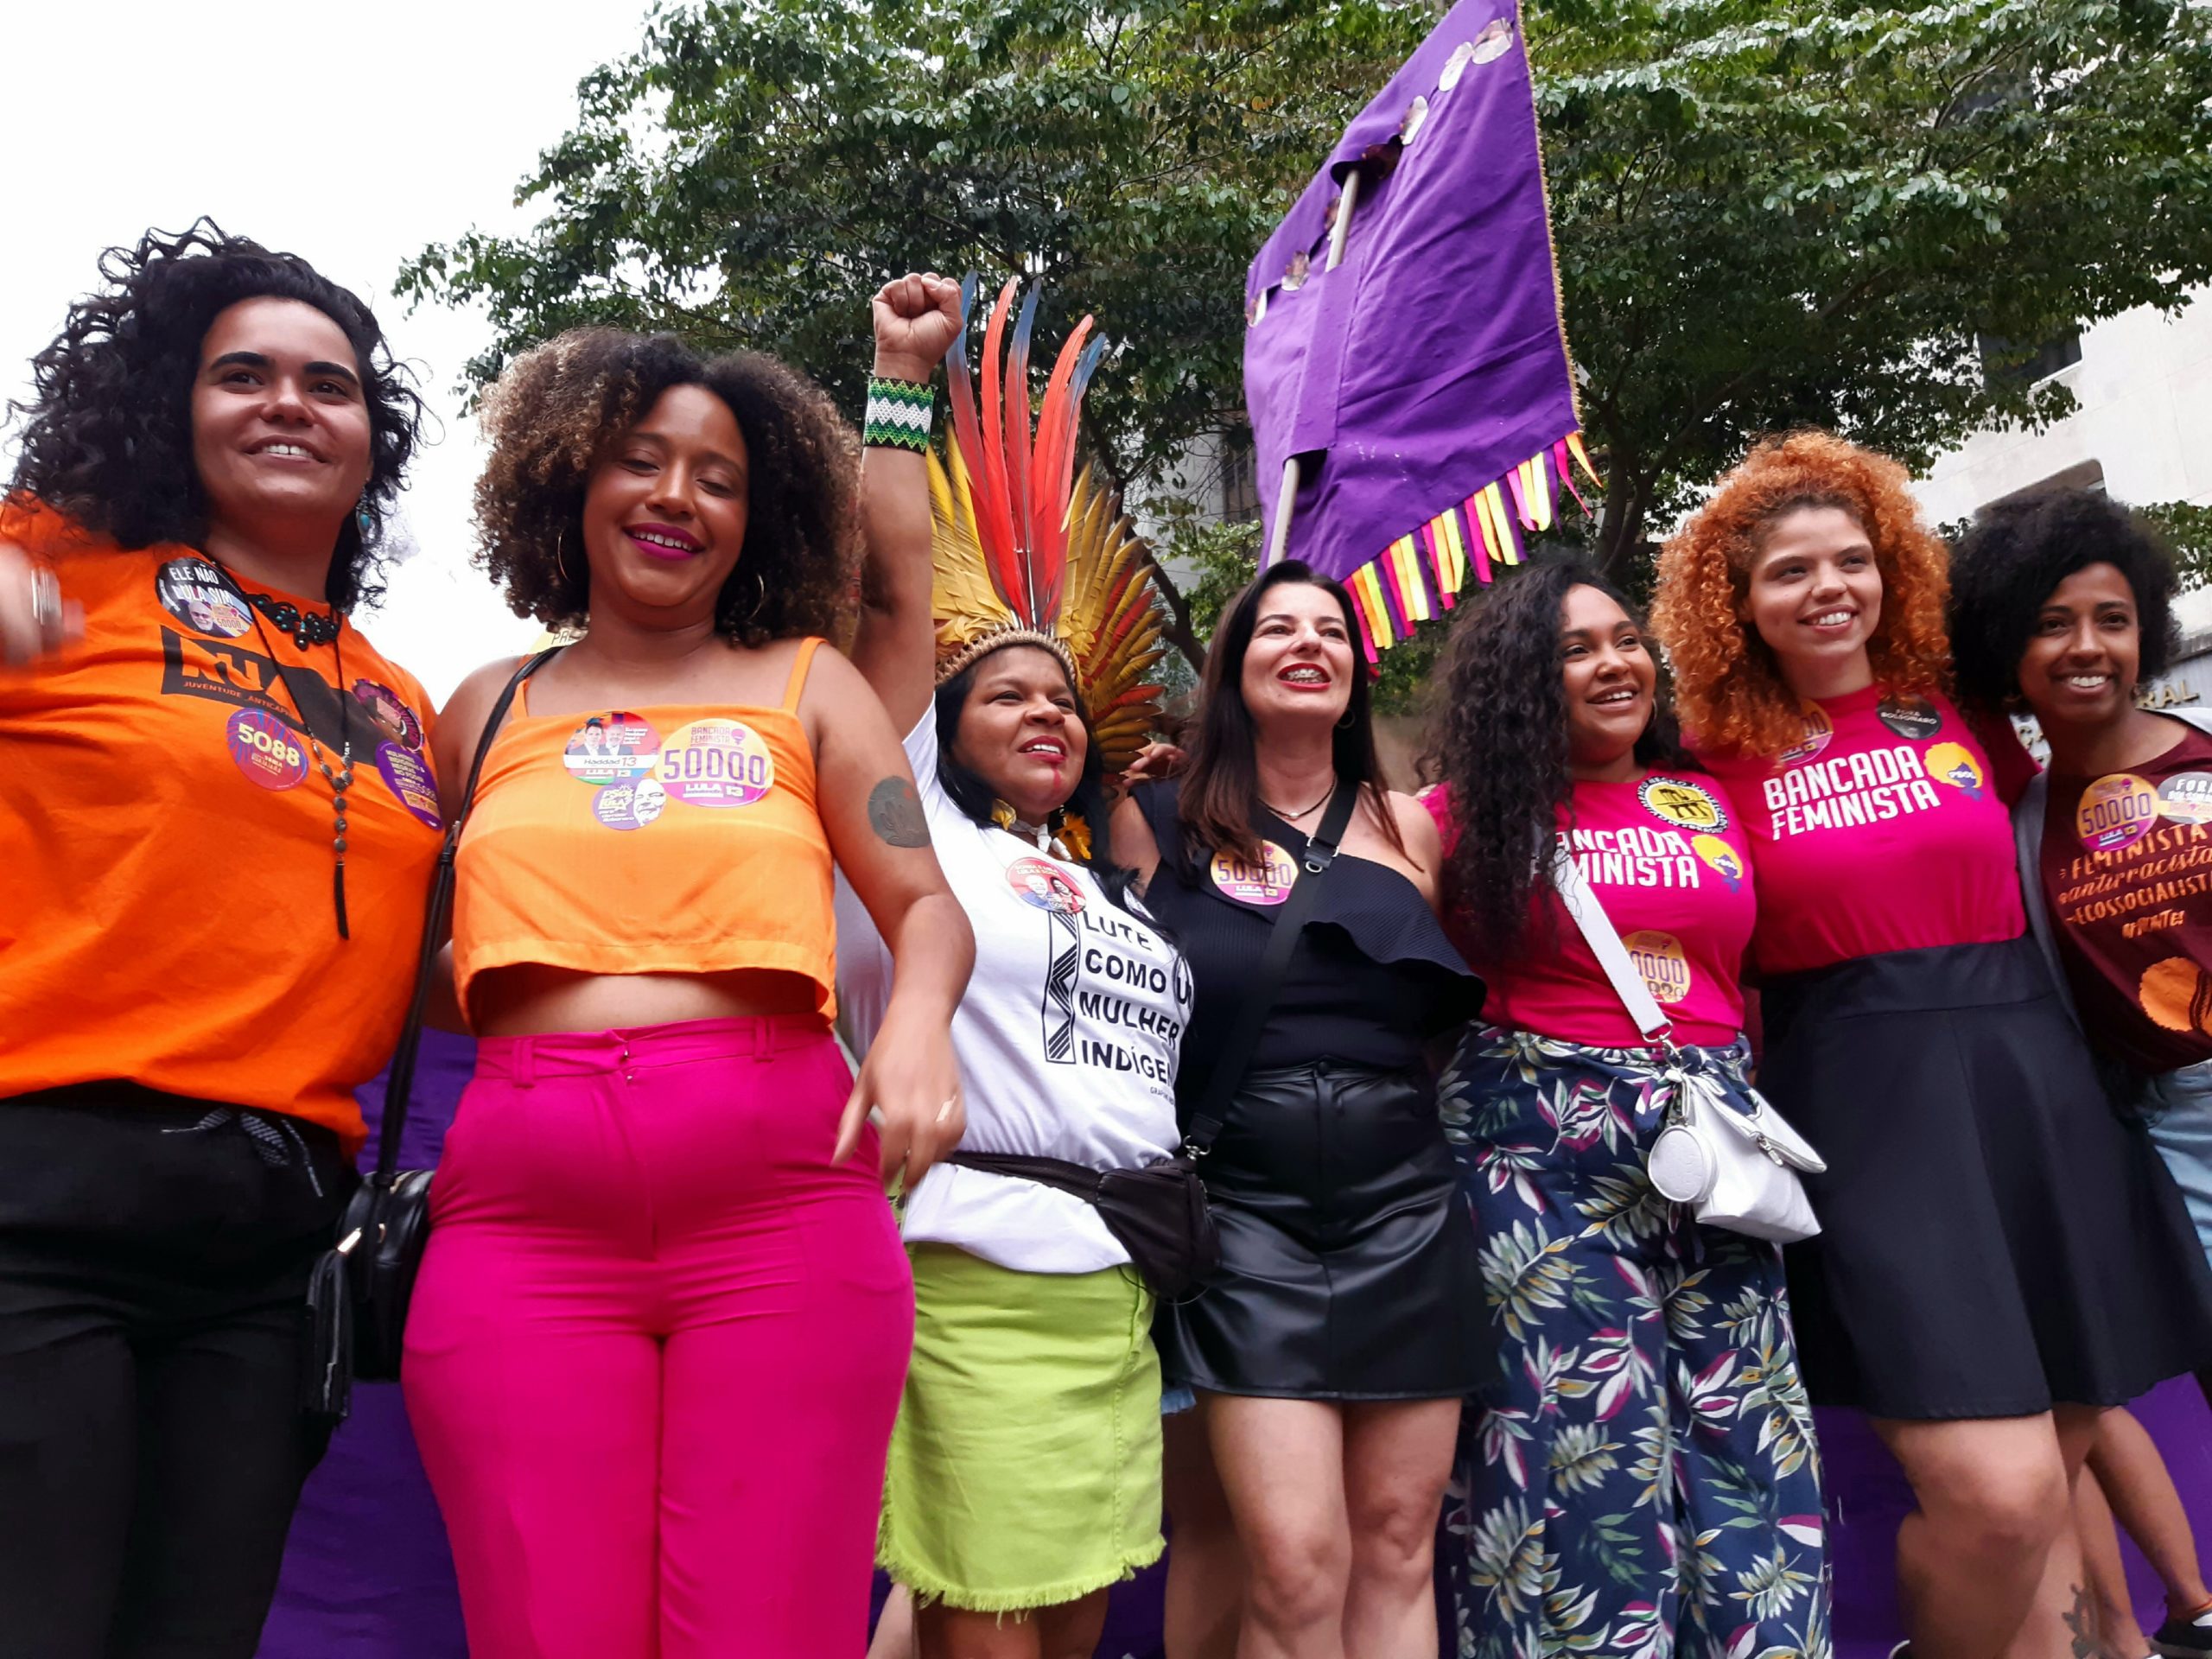 Sônia Guajajara (third from left), an Indigenous-rights campaigner and federal deputy candidate who supports the presidential campaign of the Workers' Party's Luiz Inácio "Lula" Da Silva. Here, she appears with other feminist campaigners at a left-wing rally in São Paolo the day after Socialist and Liberty Party (PSOL) candidate for the Brazilian Chamber of Deputies Guilherme Boulos and PSOL candidate for São Paolo state deputy Ediane Maria were threatened with a gun by a Bolsonaro supporter earlier this month / credit: Richard Matoušek